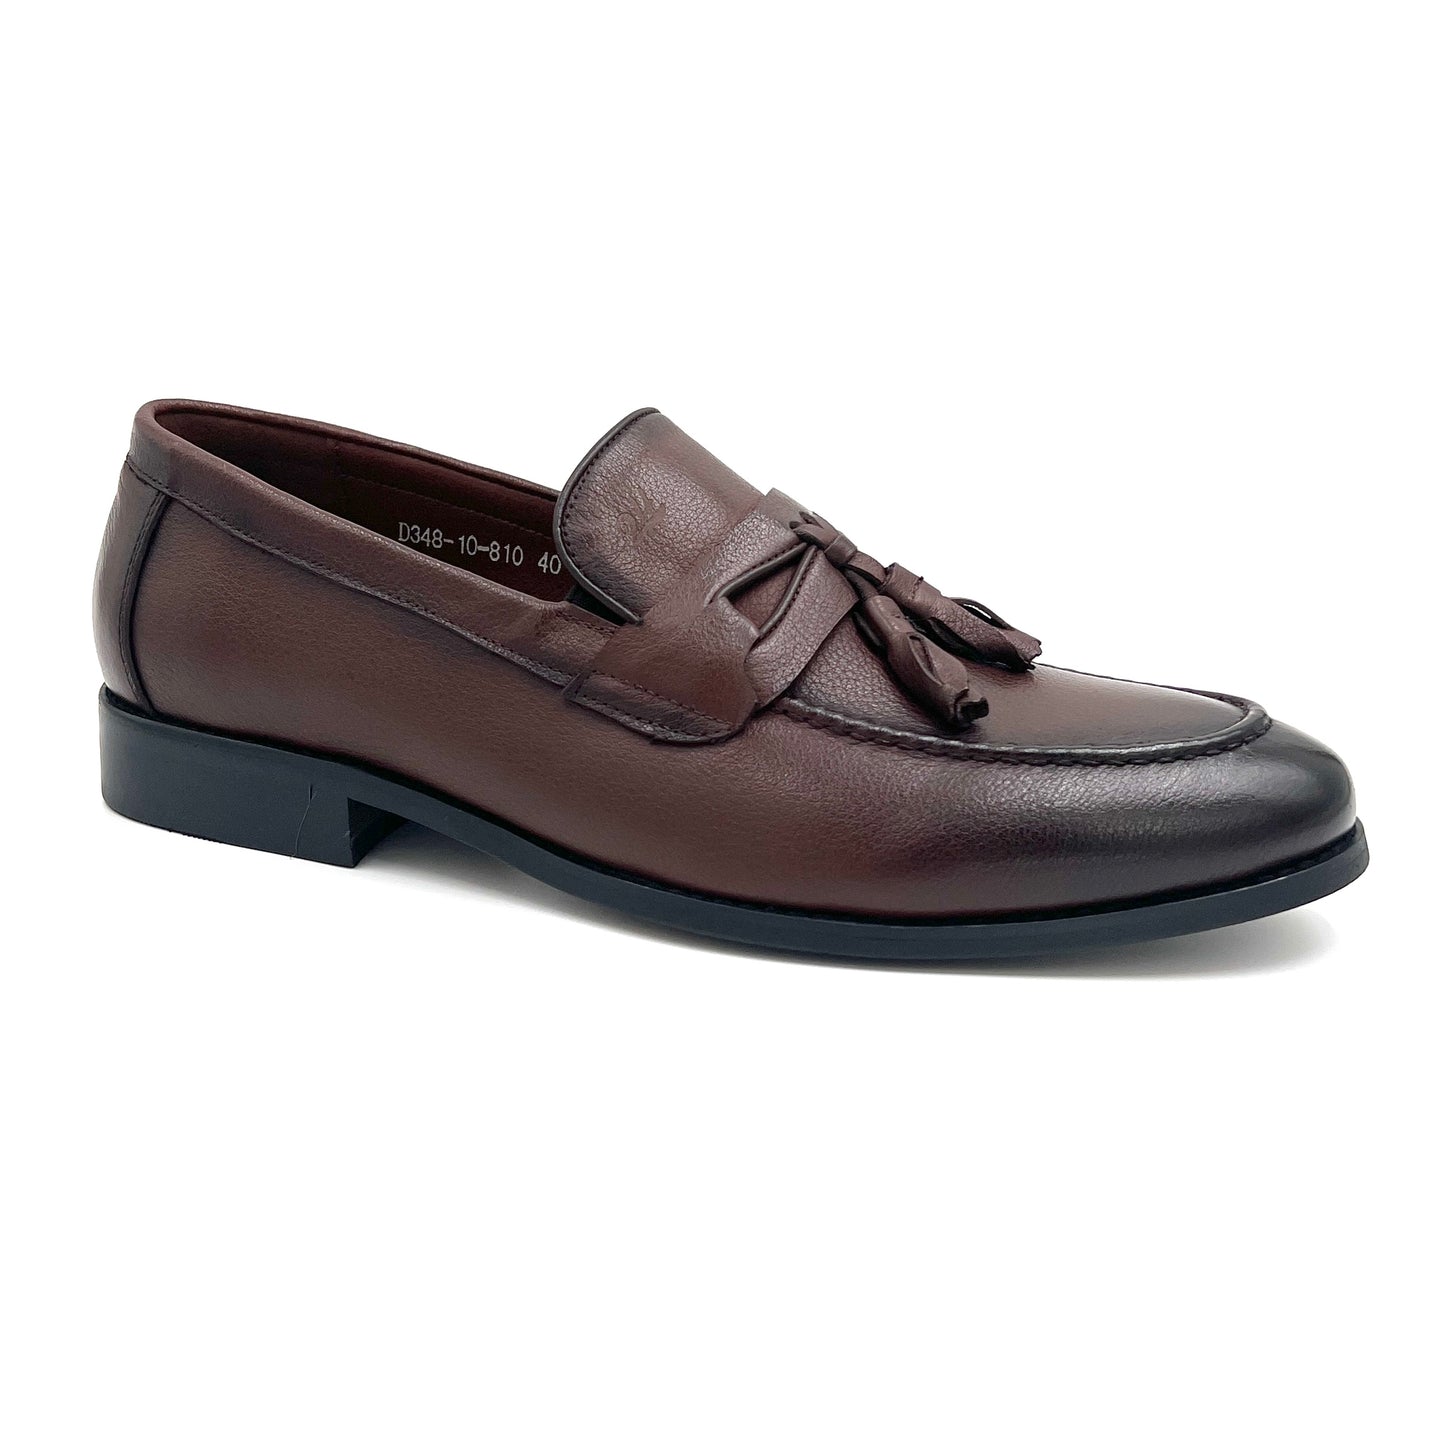 2H #D348-10-810 Brown Classic Shoes Genuine Leather